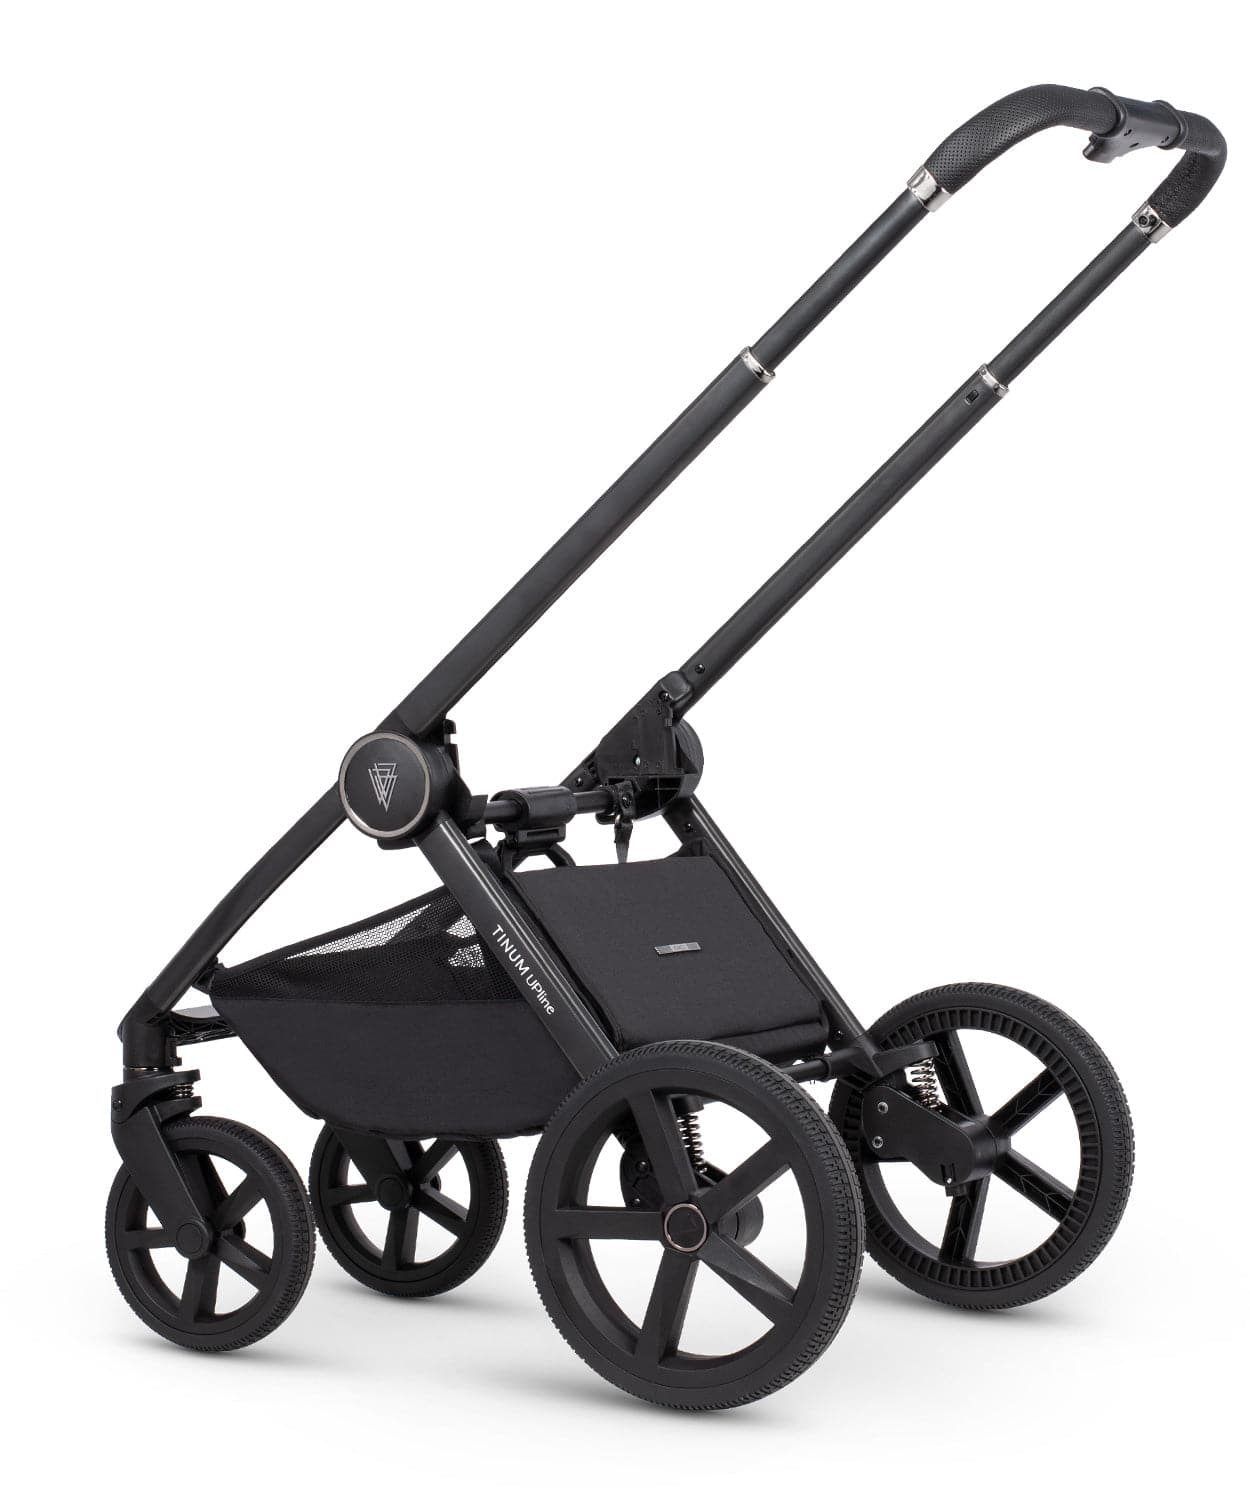 Venicci Tinum Upline 3 In 1 Travel System - Classic Grey -  | For Your Little One